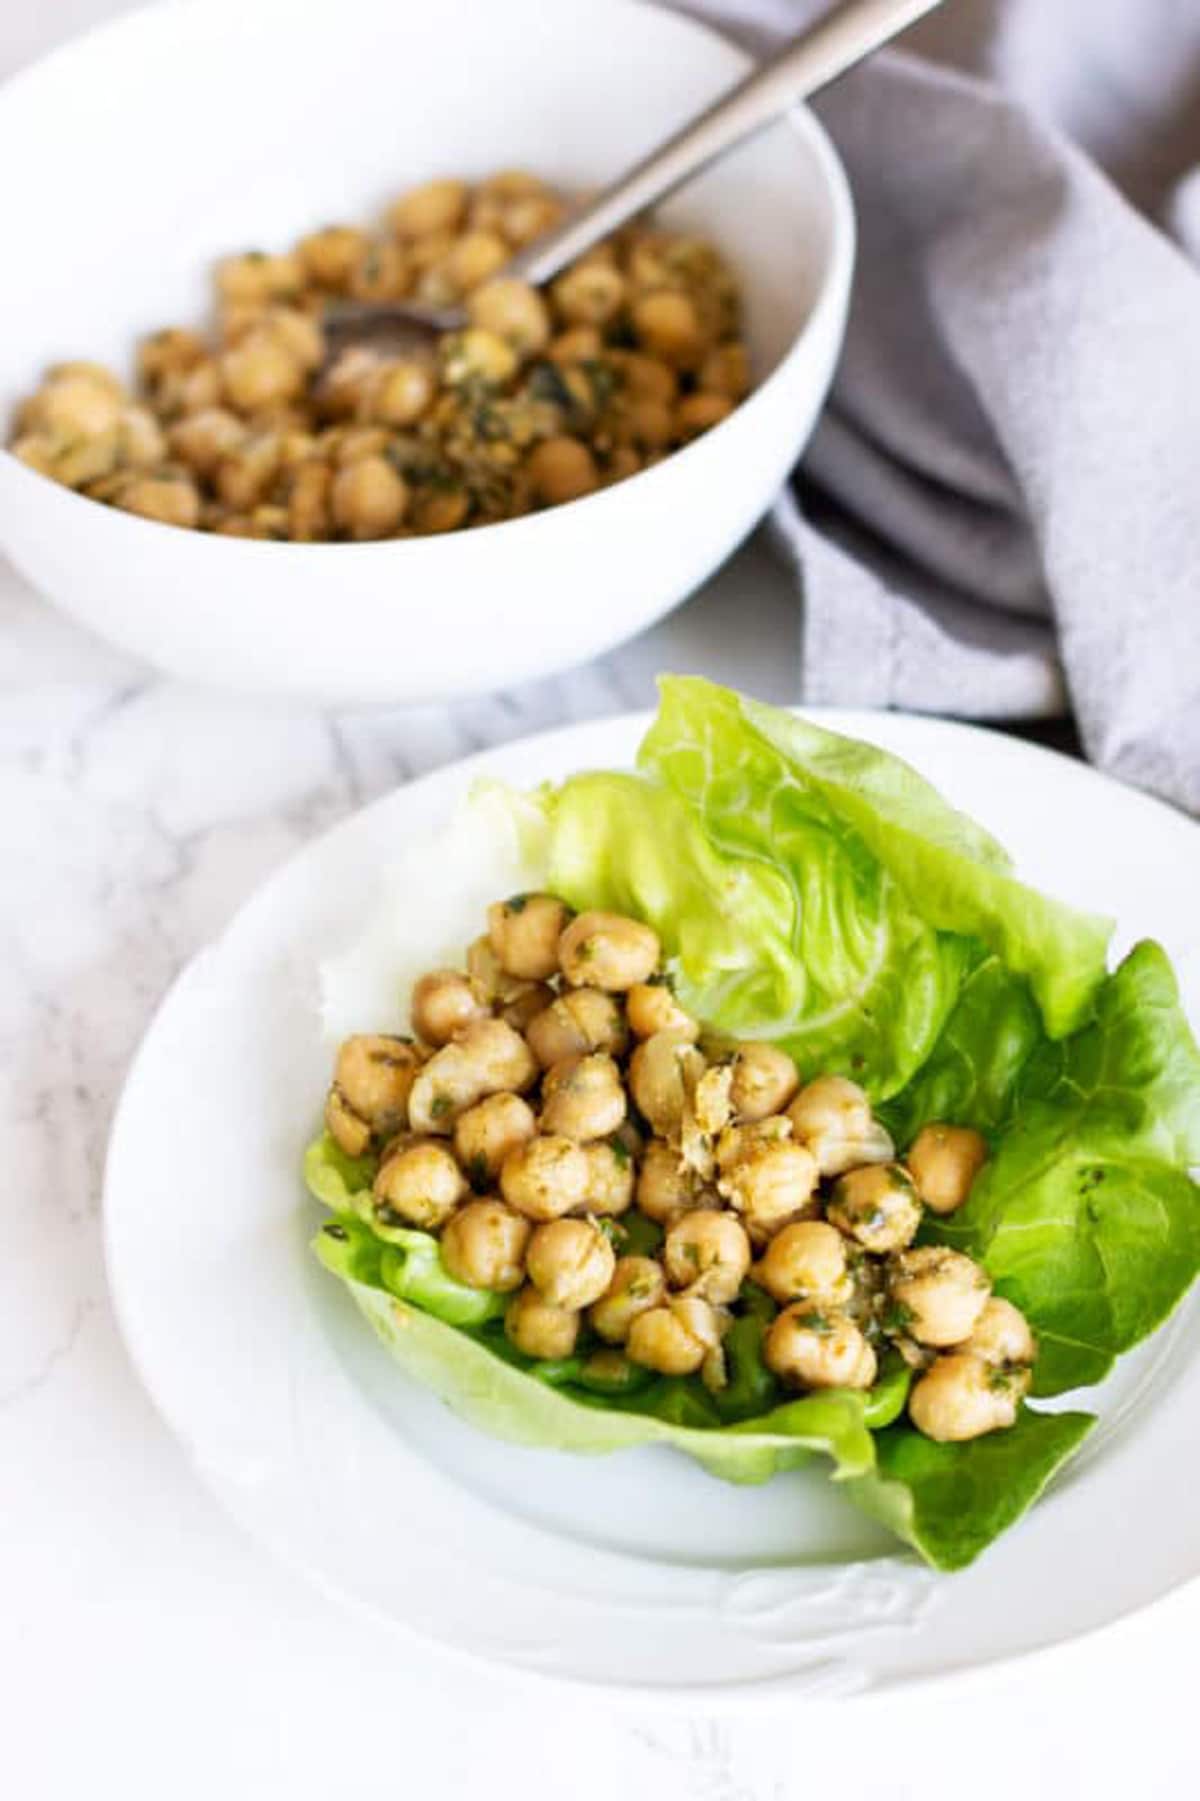 White plate containing a Vegetarian lettuce wrap, bowl of pesto chickpeas on table.